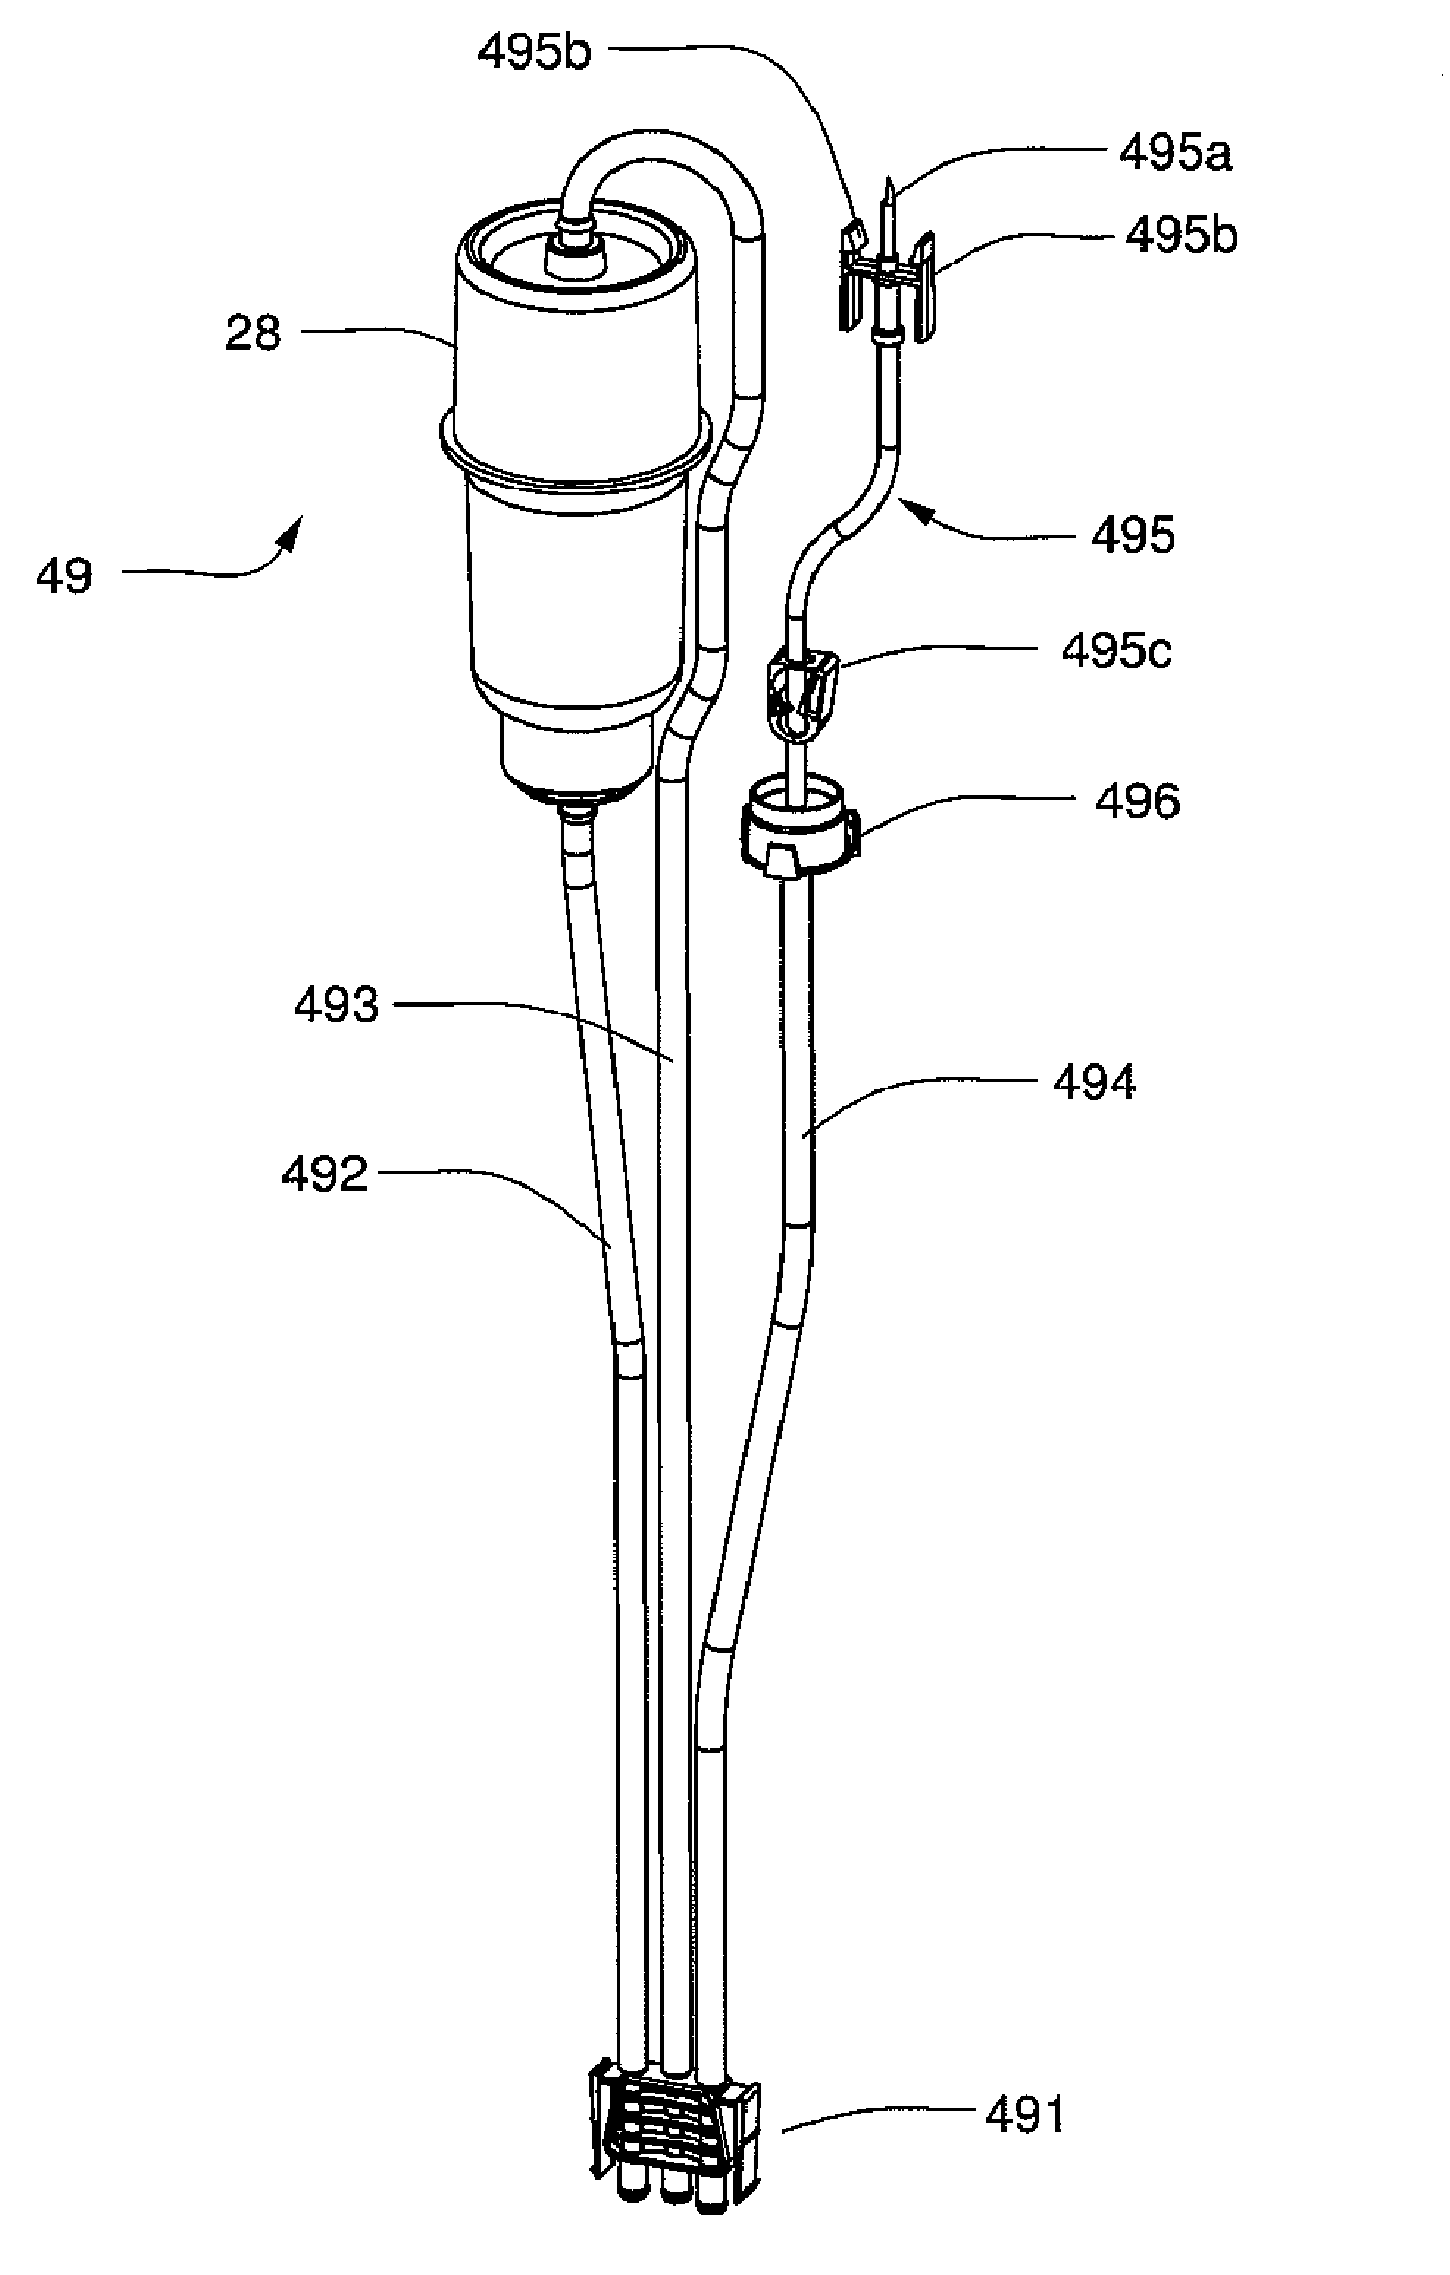 Reagent supply for a hemodialysis system